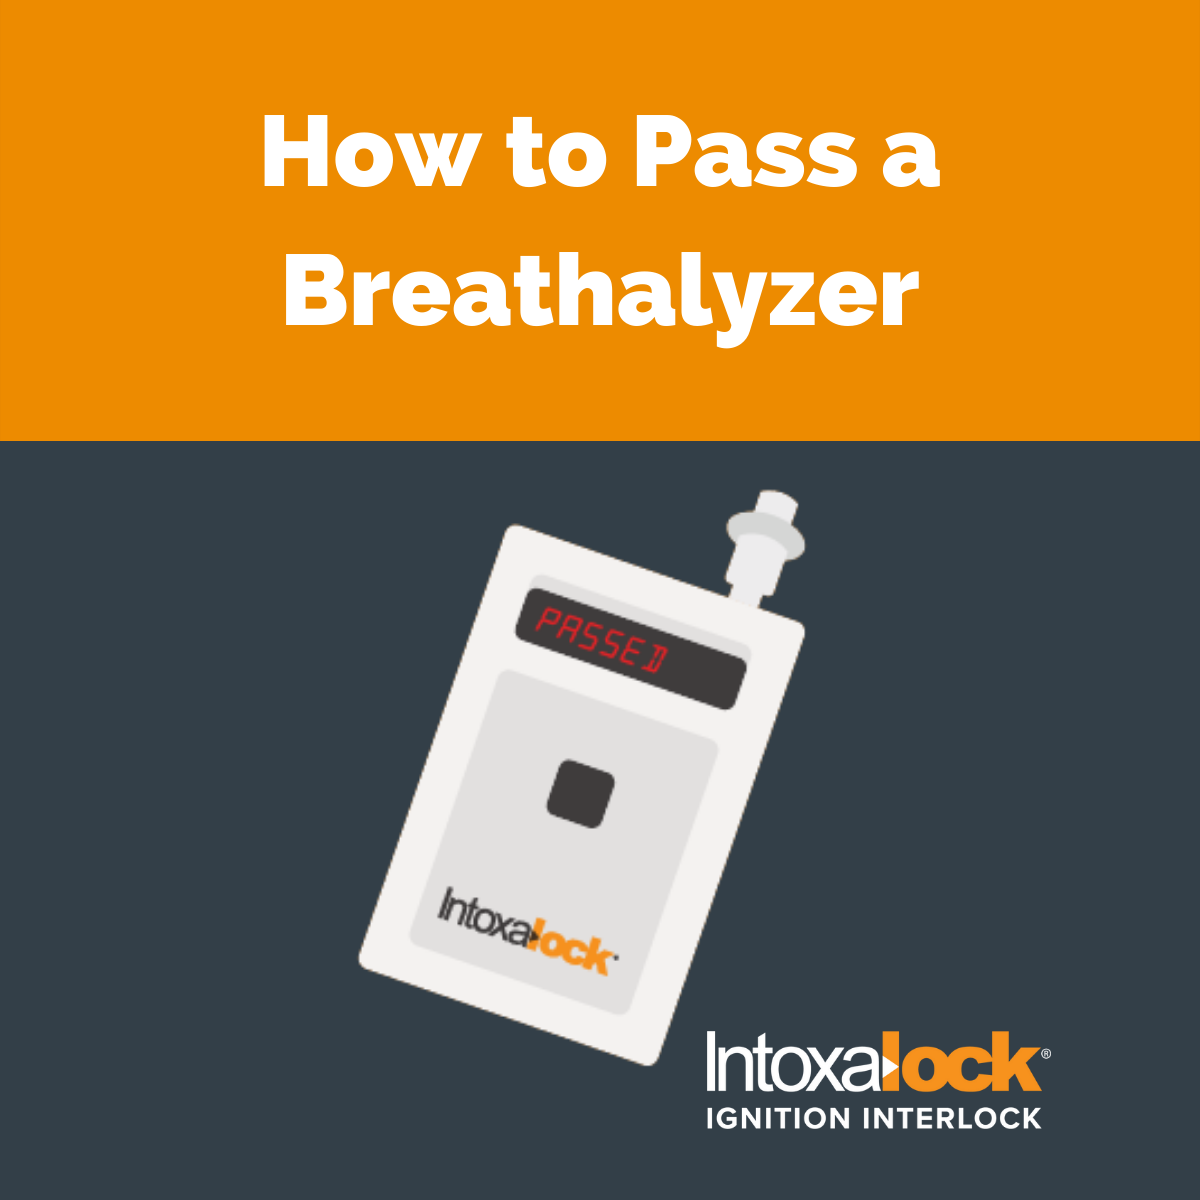 How to Pass a Breathalyzer Test